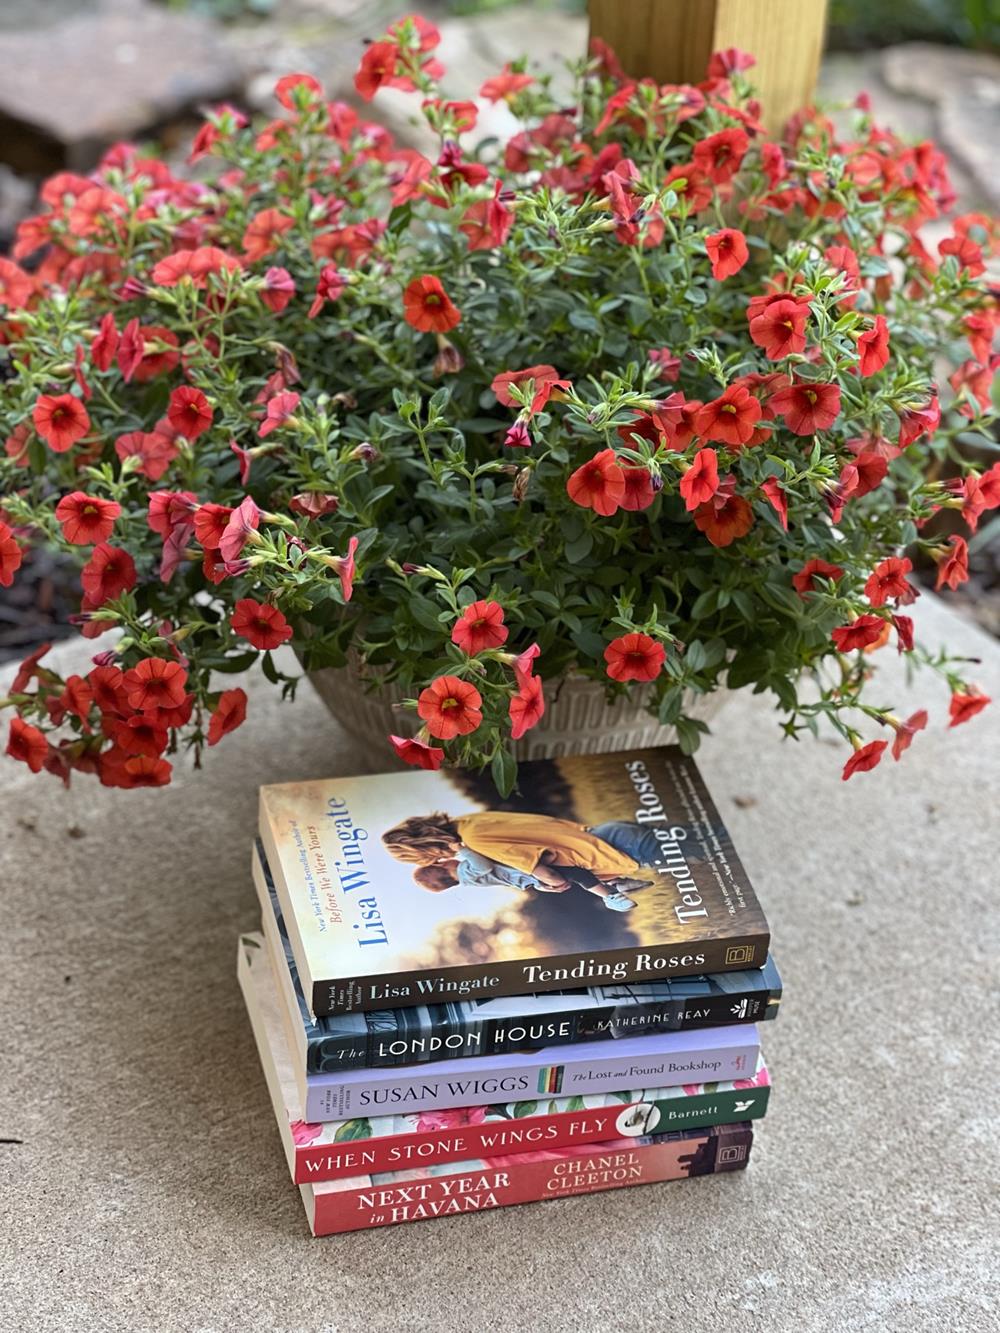 A stack of backlist books for summer and a flowering plant